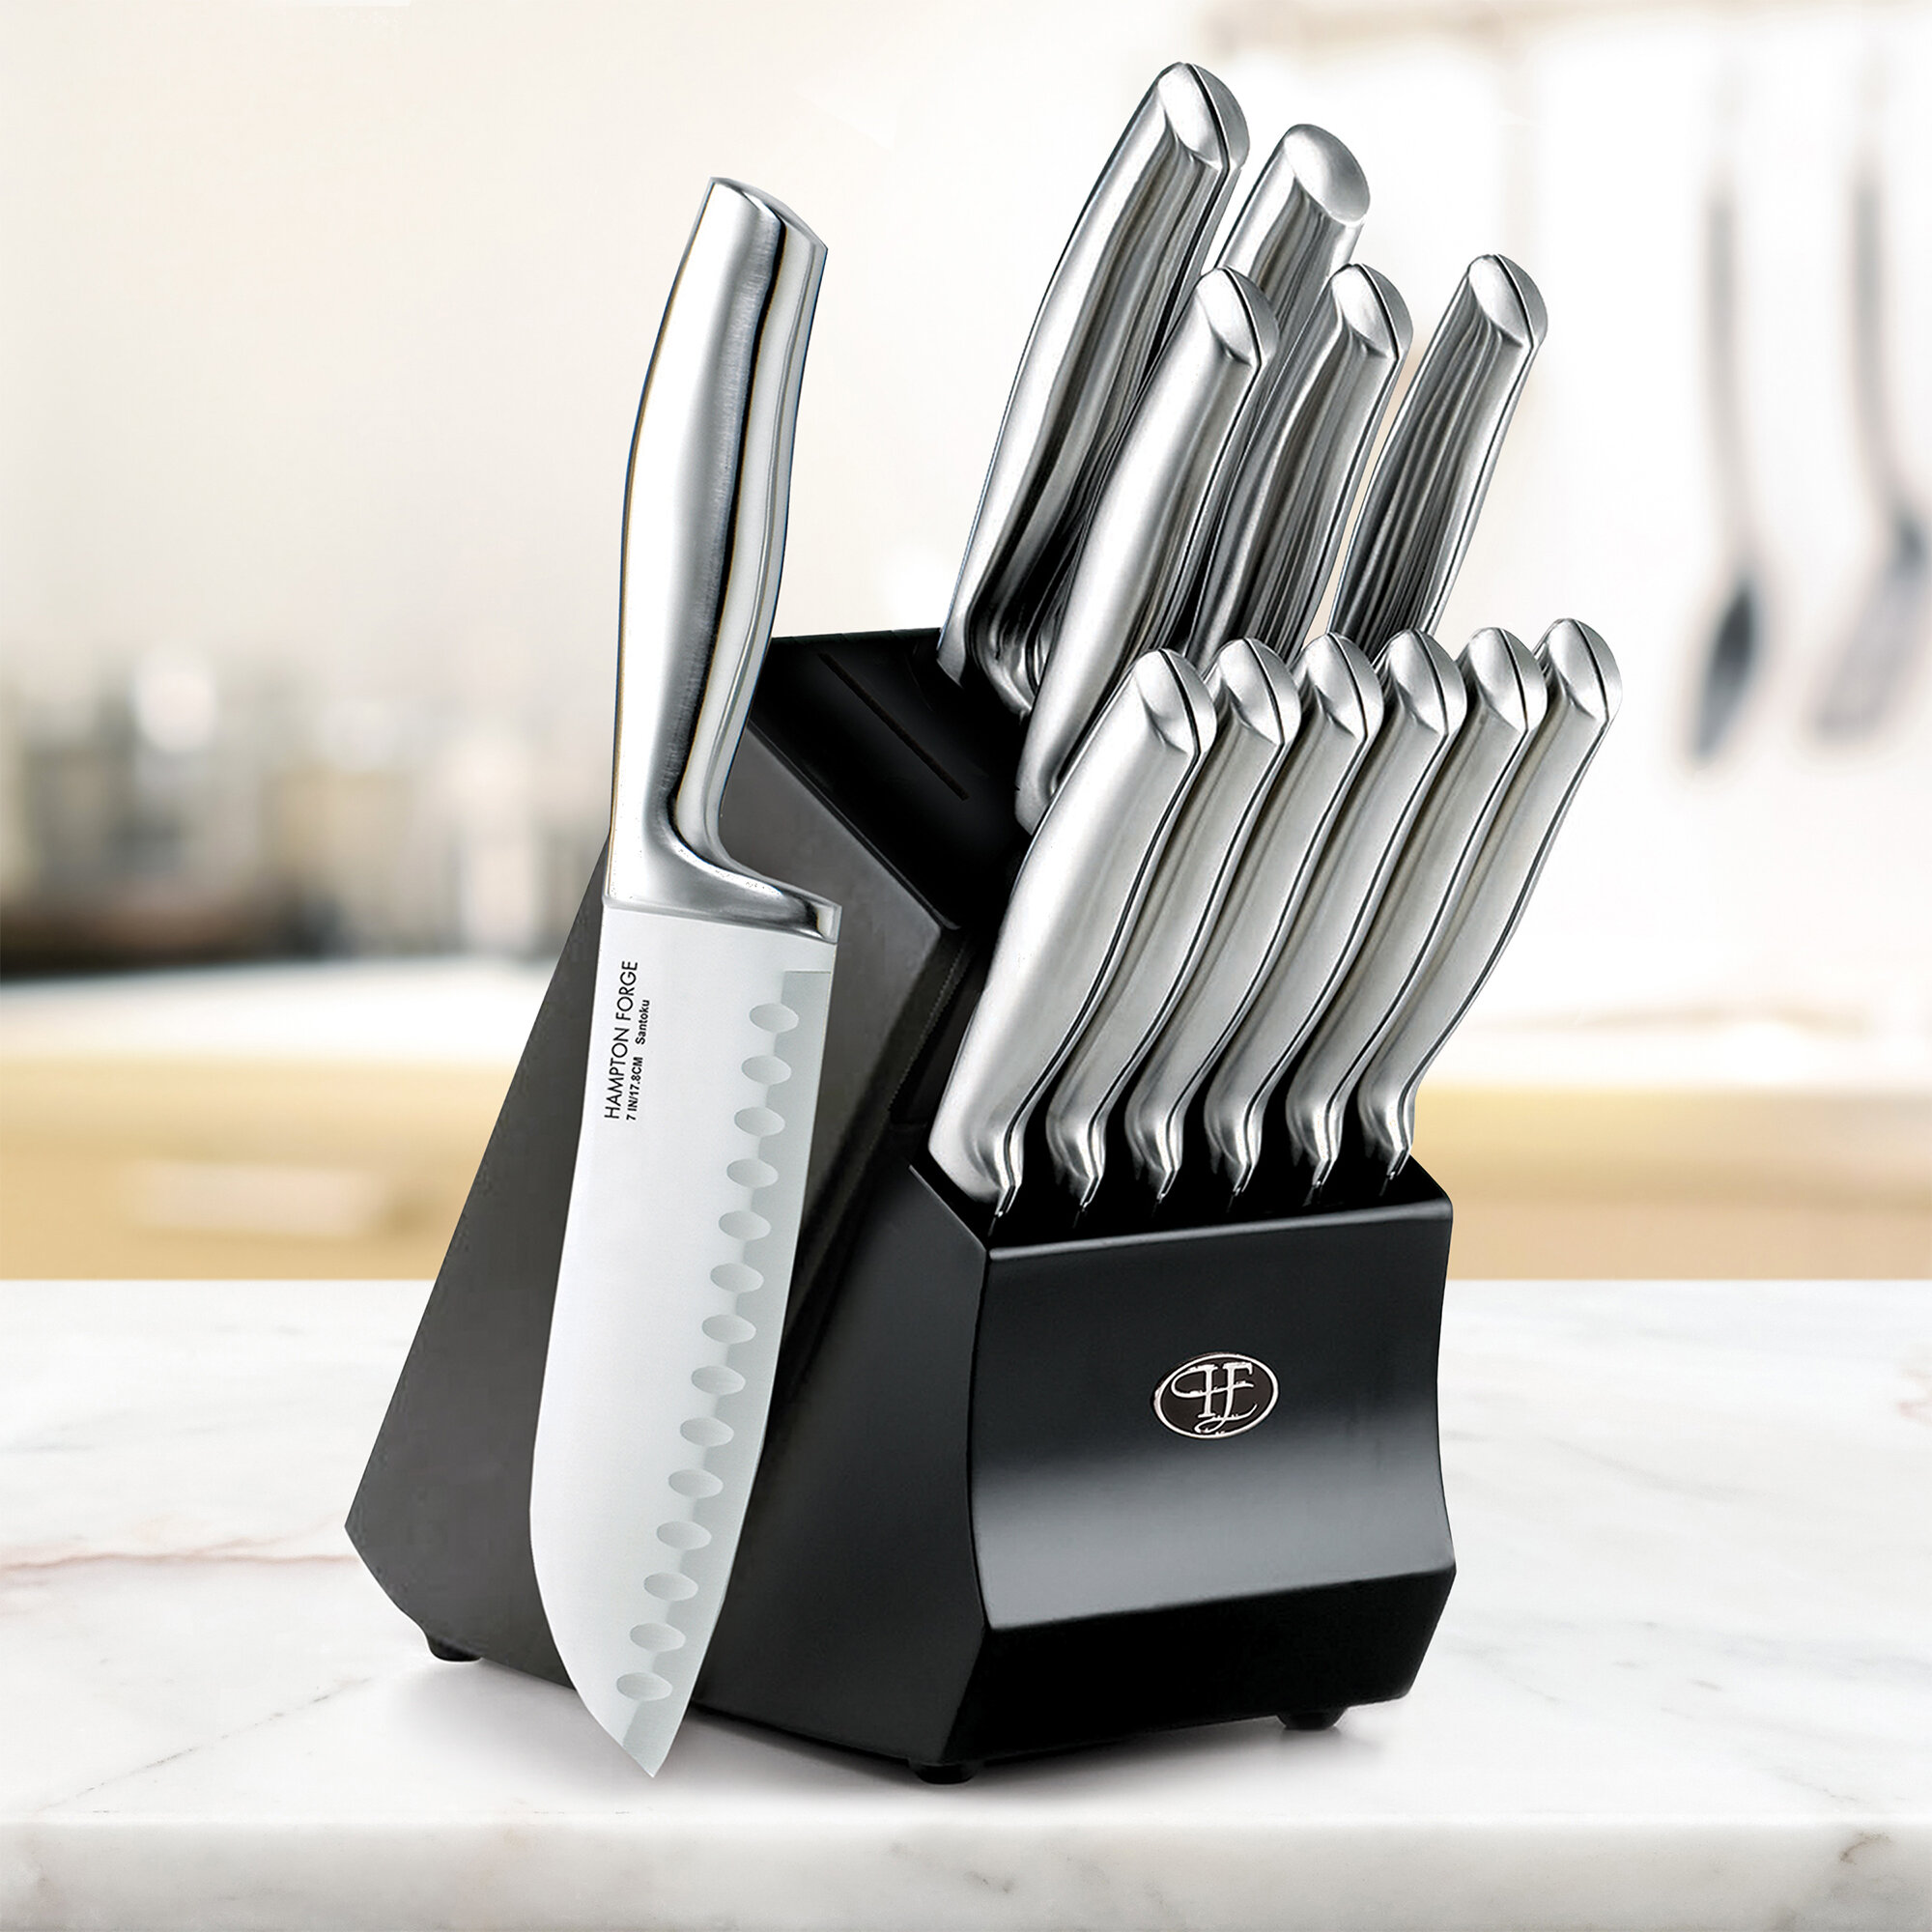 Chicago Cutlery 13 Piece High Carbon Stainless Steel Knife Block Set &  Reviews